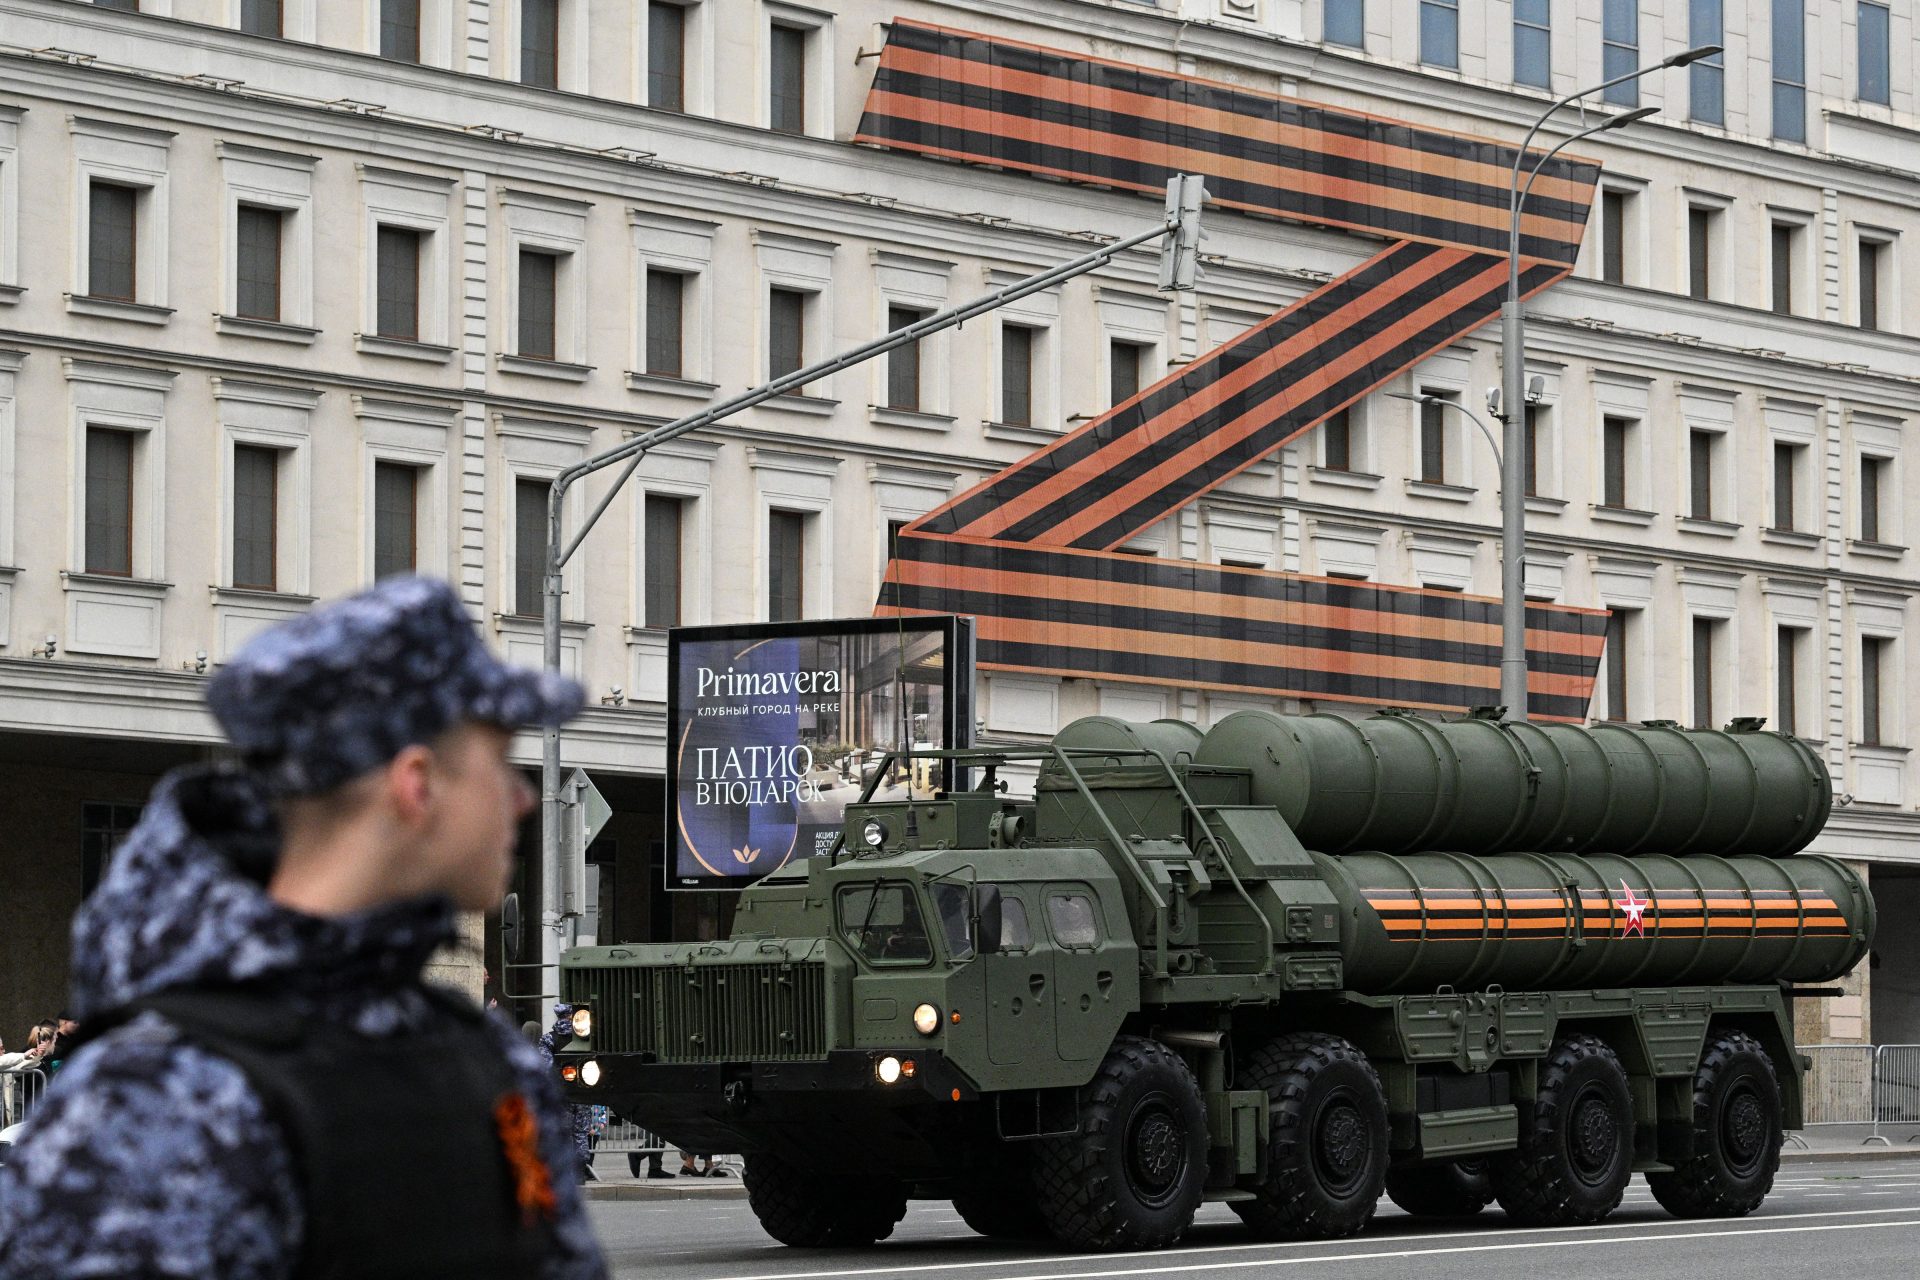 Russia’s air defense reshuffle may signal Moscow is overstretched